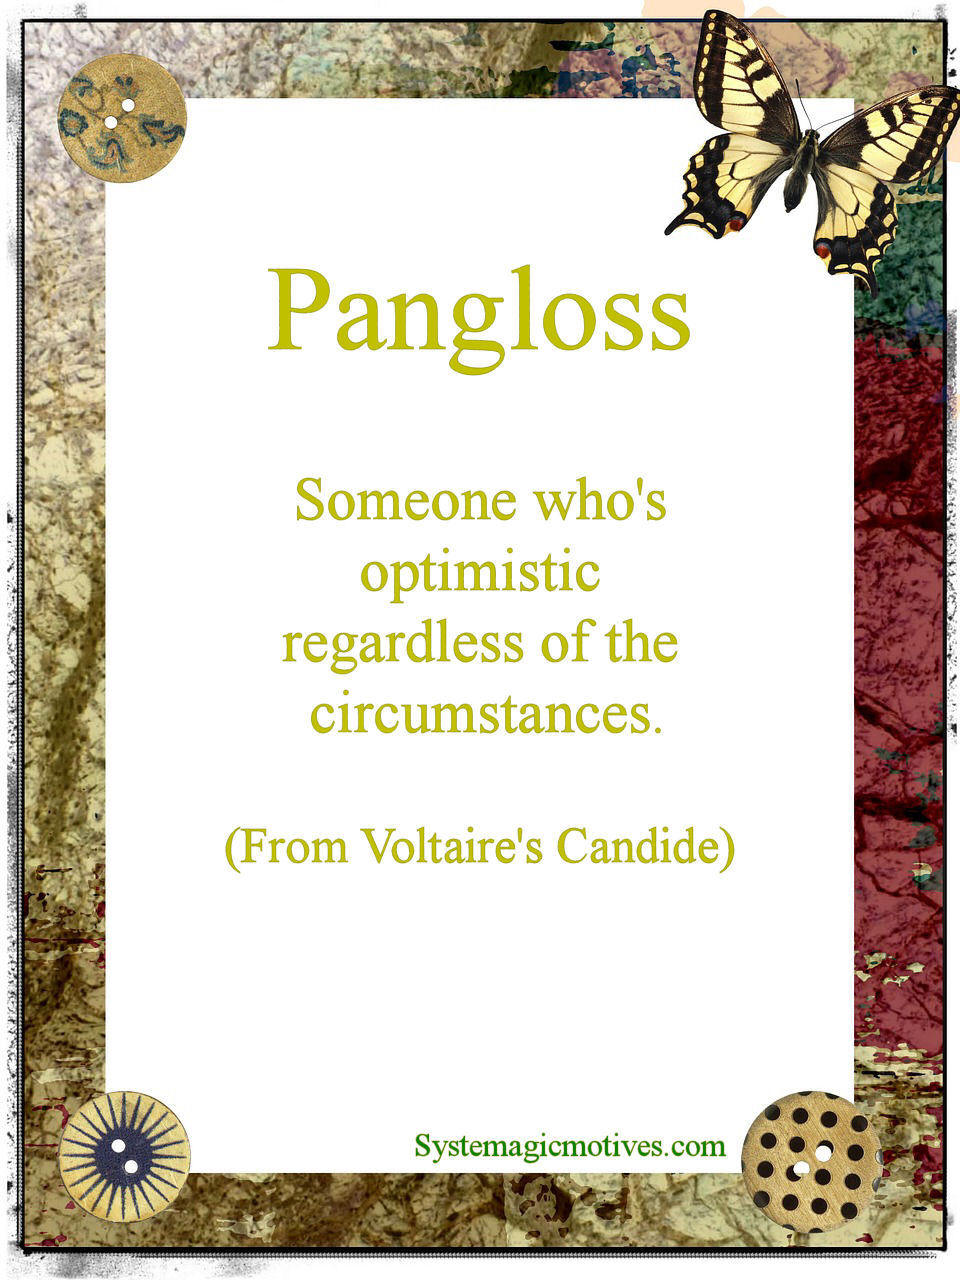 Graphic Definition of Pangloss